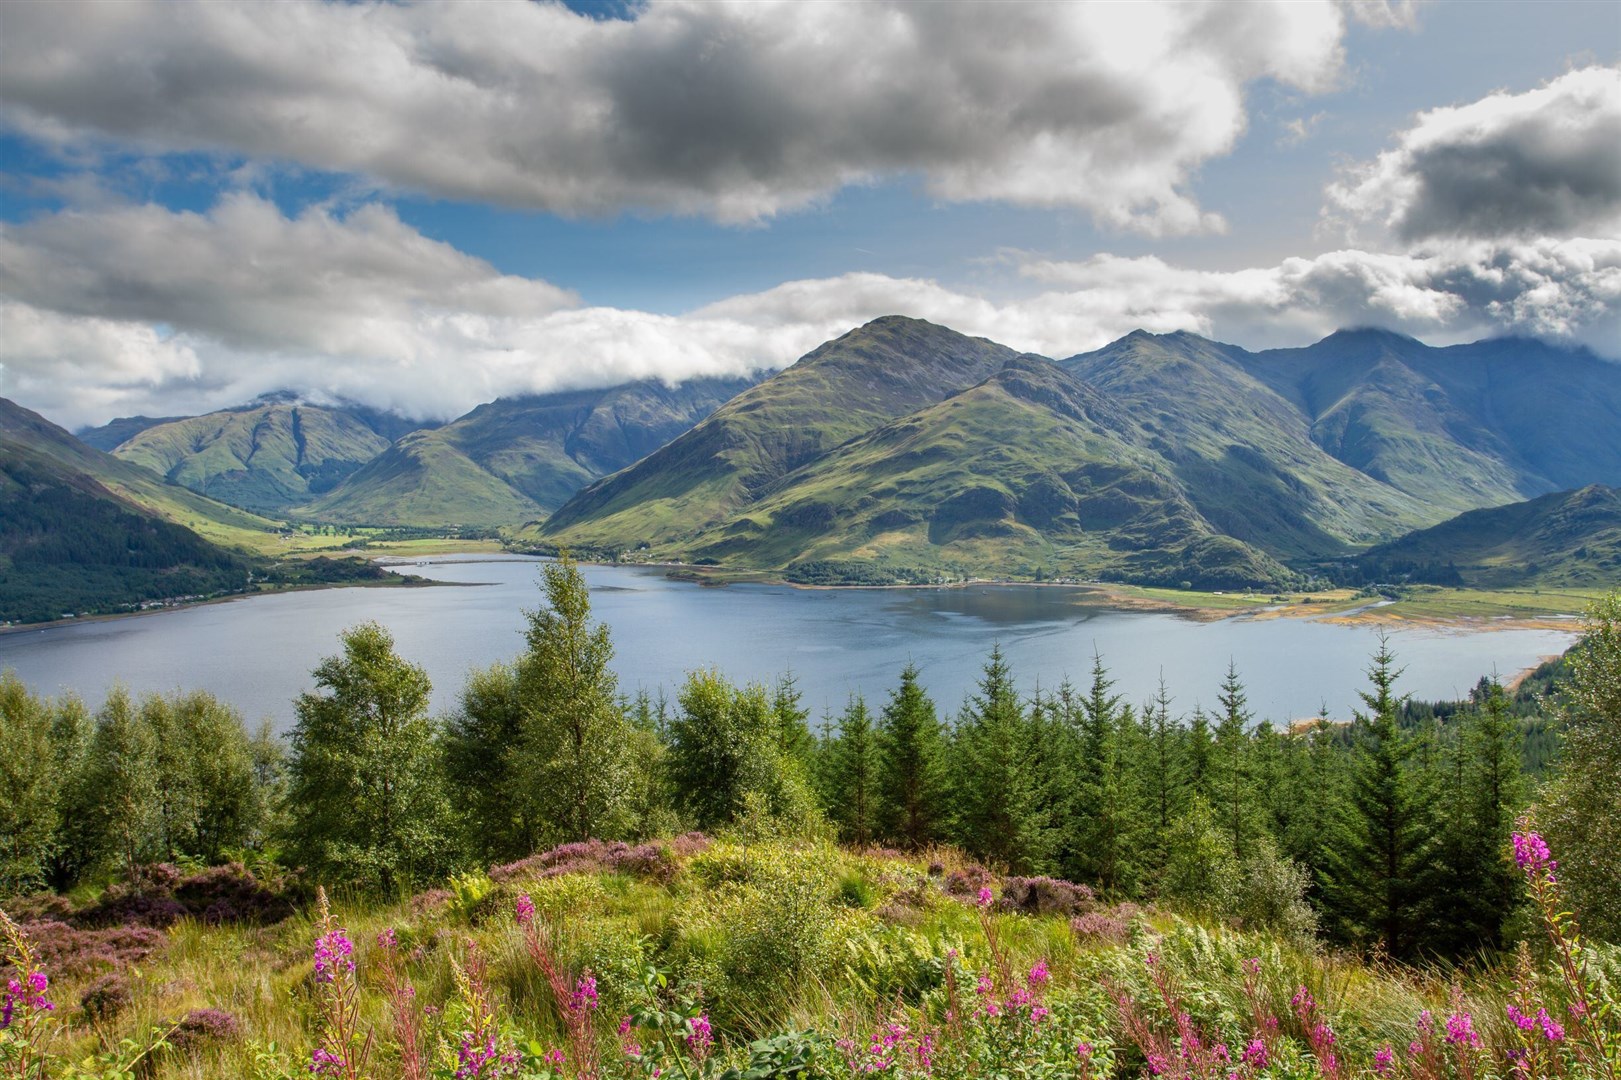 Mam Ratagan overlooking Loch Duich is one of Forestry and Land Scotland's many sites.